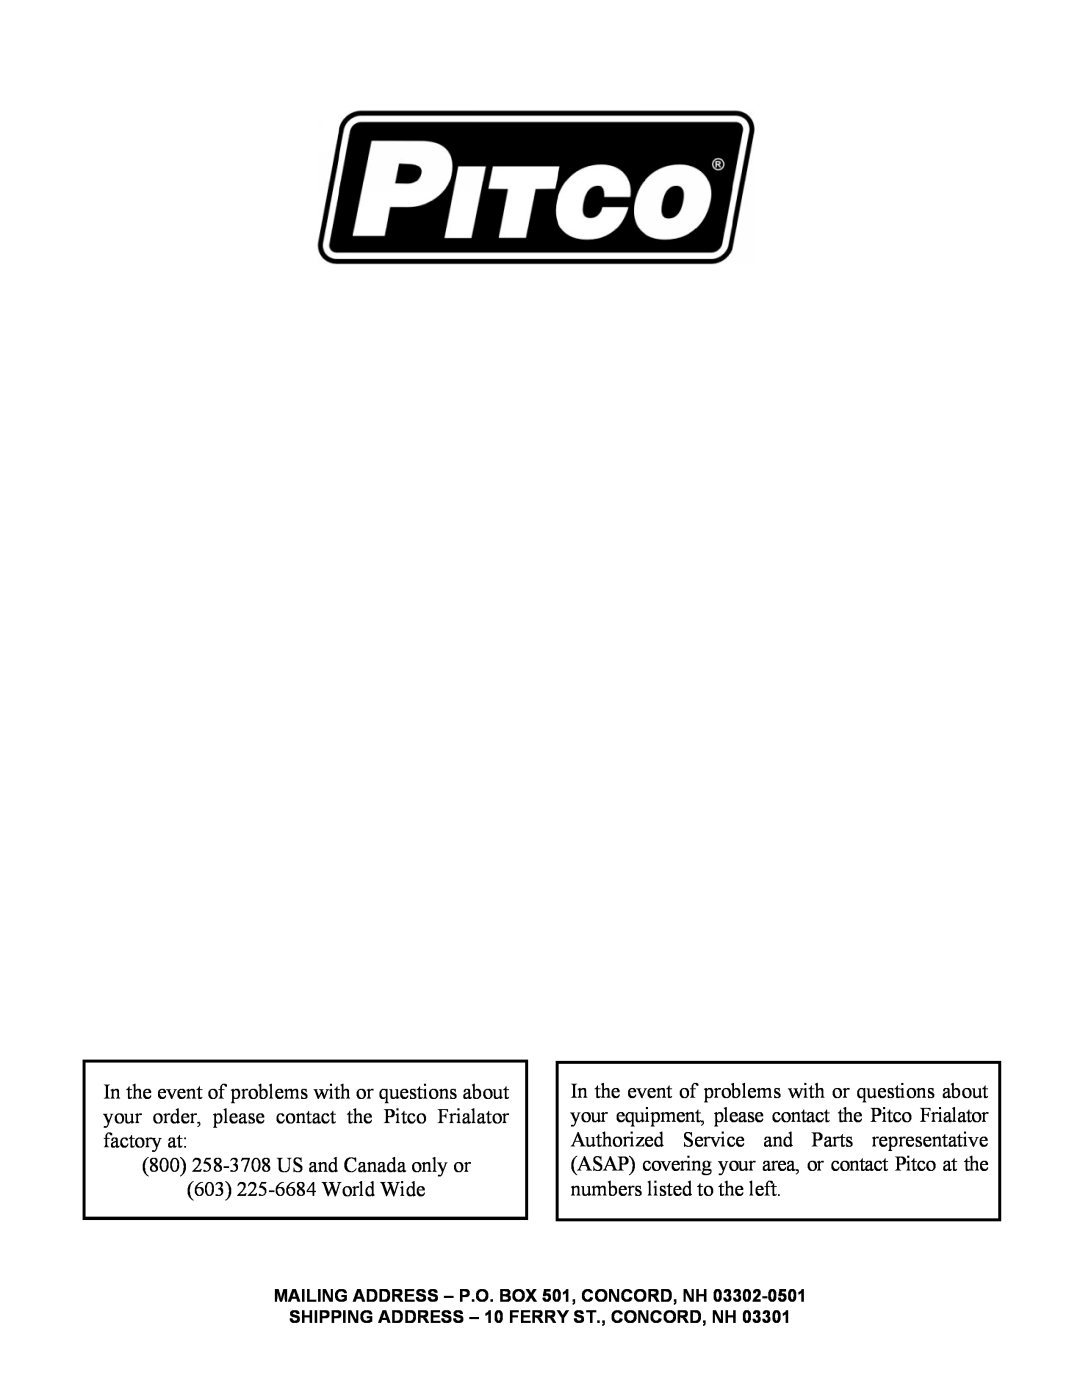 Pitco Frialator L80-029 installation instructions 800258-3708US and Canada only or 